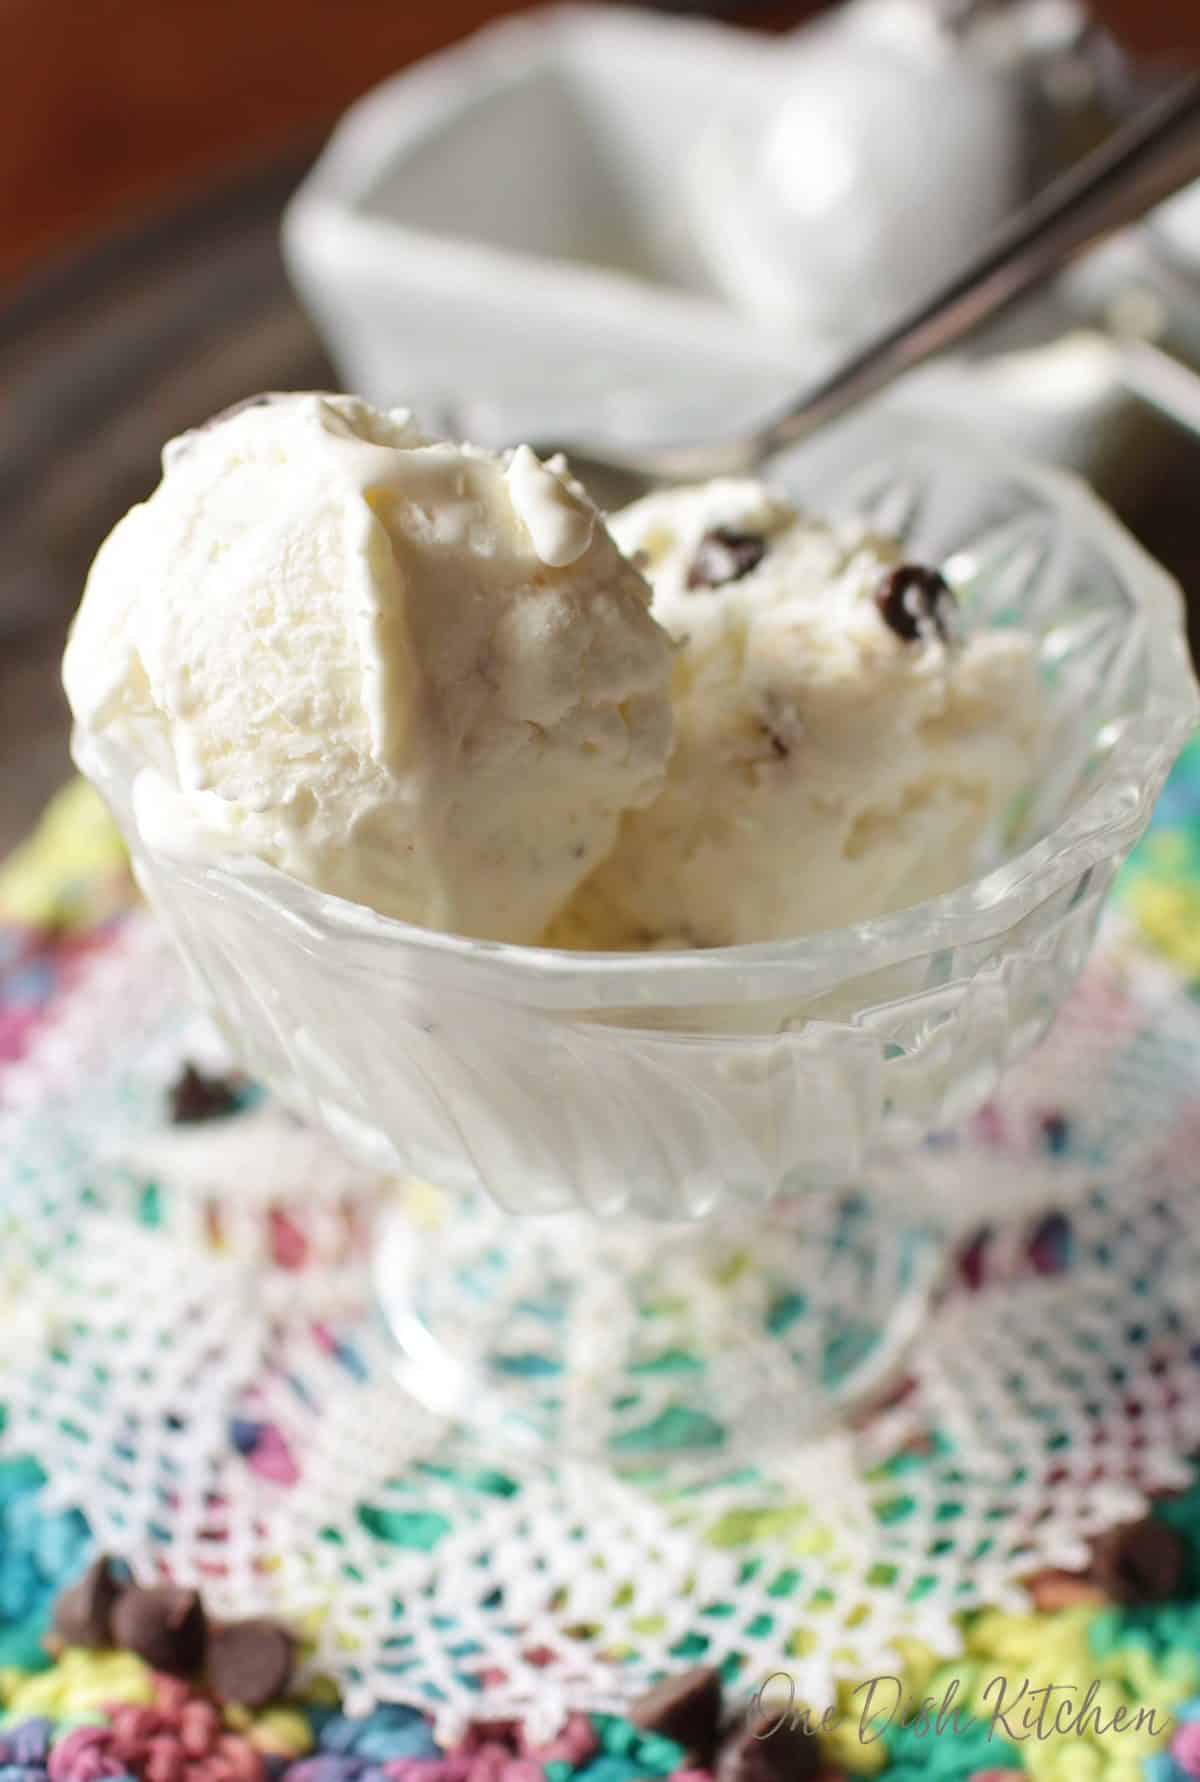 Two scoops of mint chocolate chip ice cream in a dessert glass